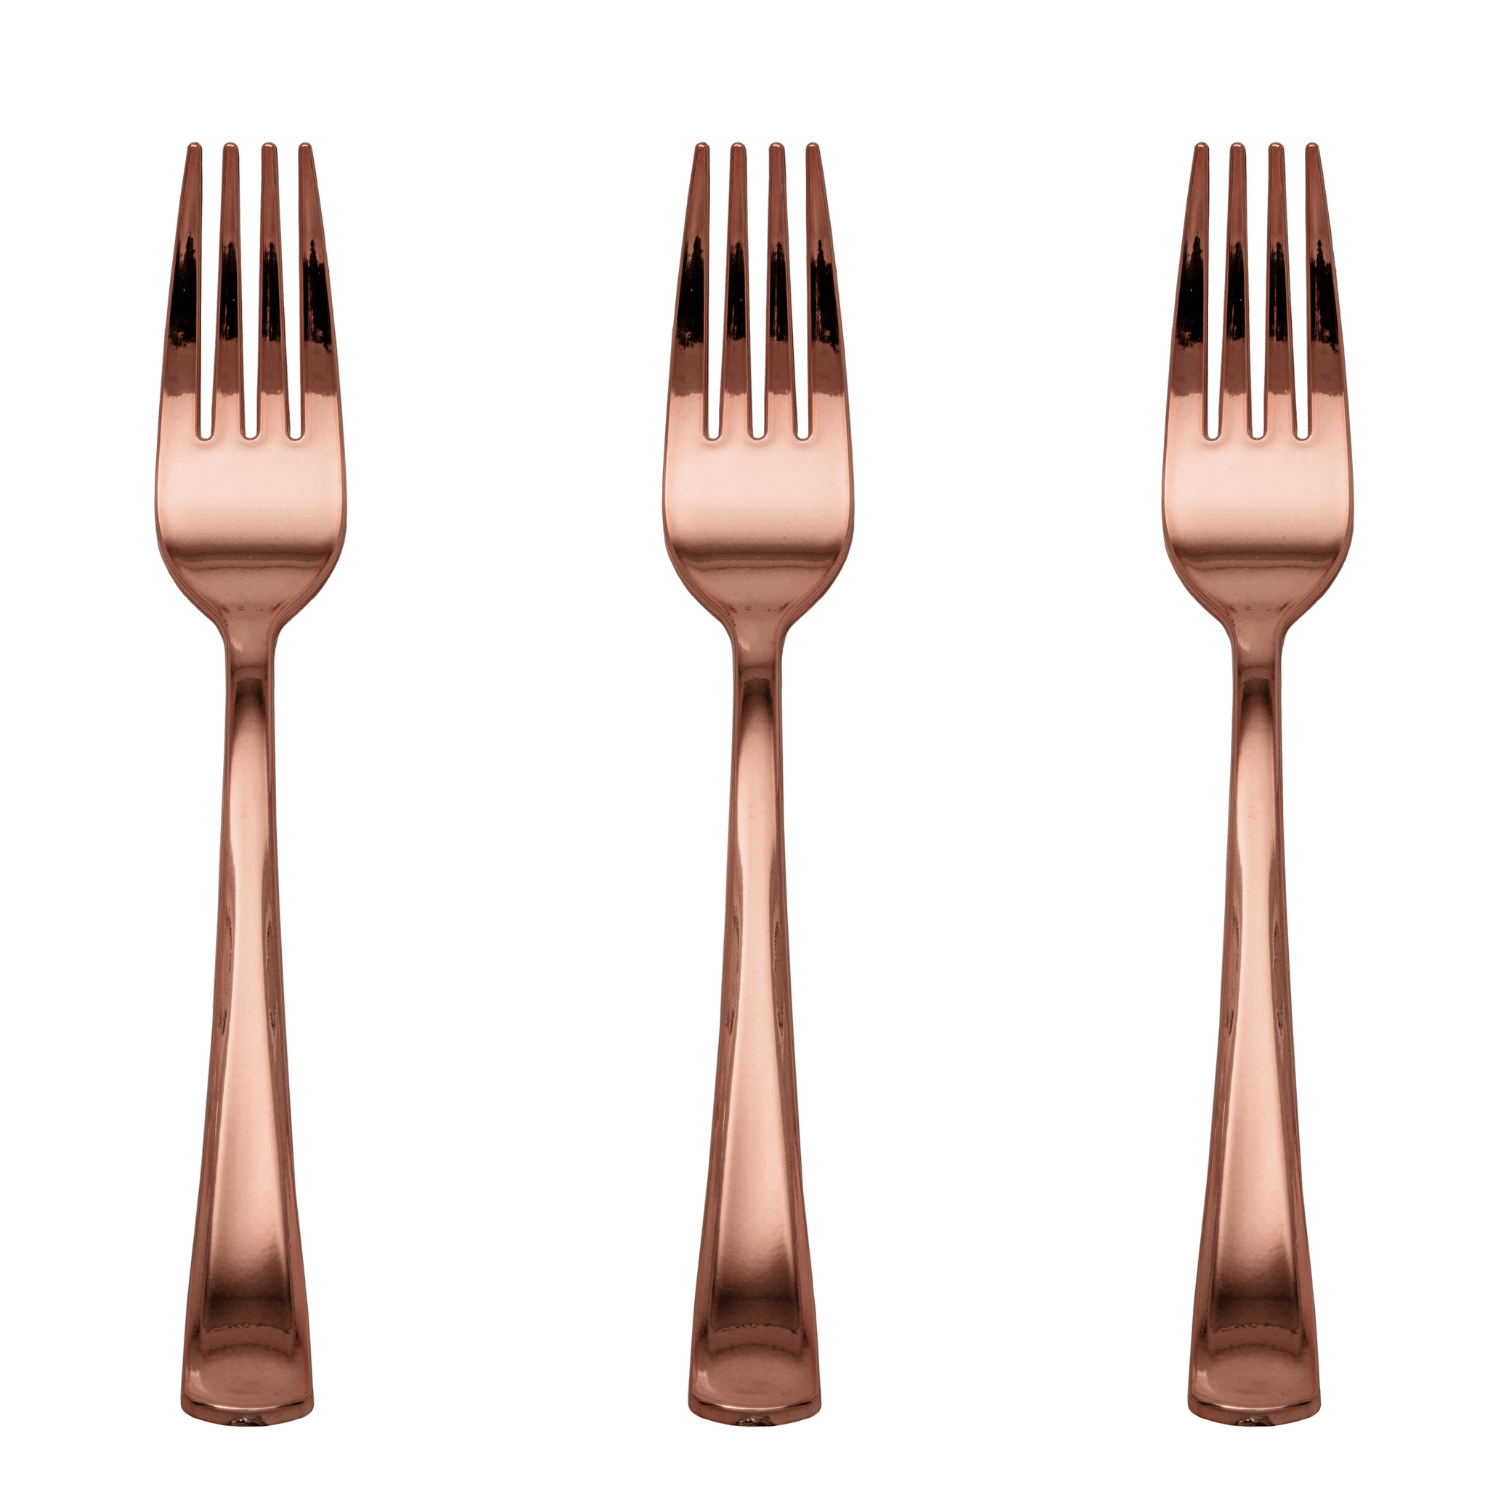 140 Piece Rose Gold Sparkle Combo Set | Serves 20 Guests - Yom Tov Settings